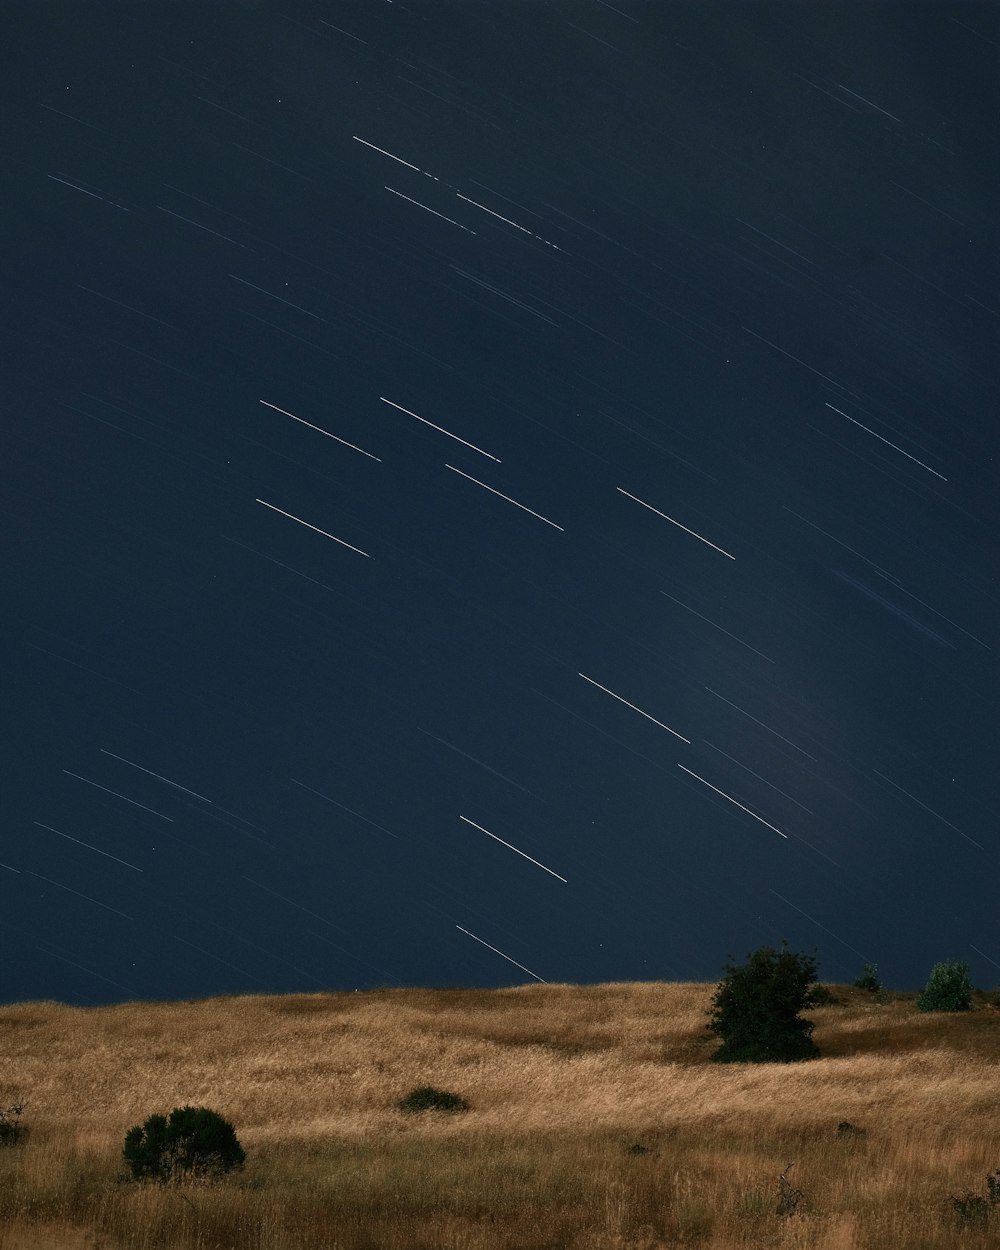 a grassy field with trees and stars in the sky